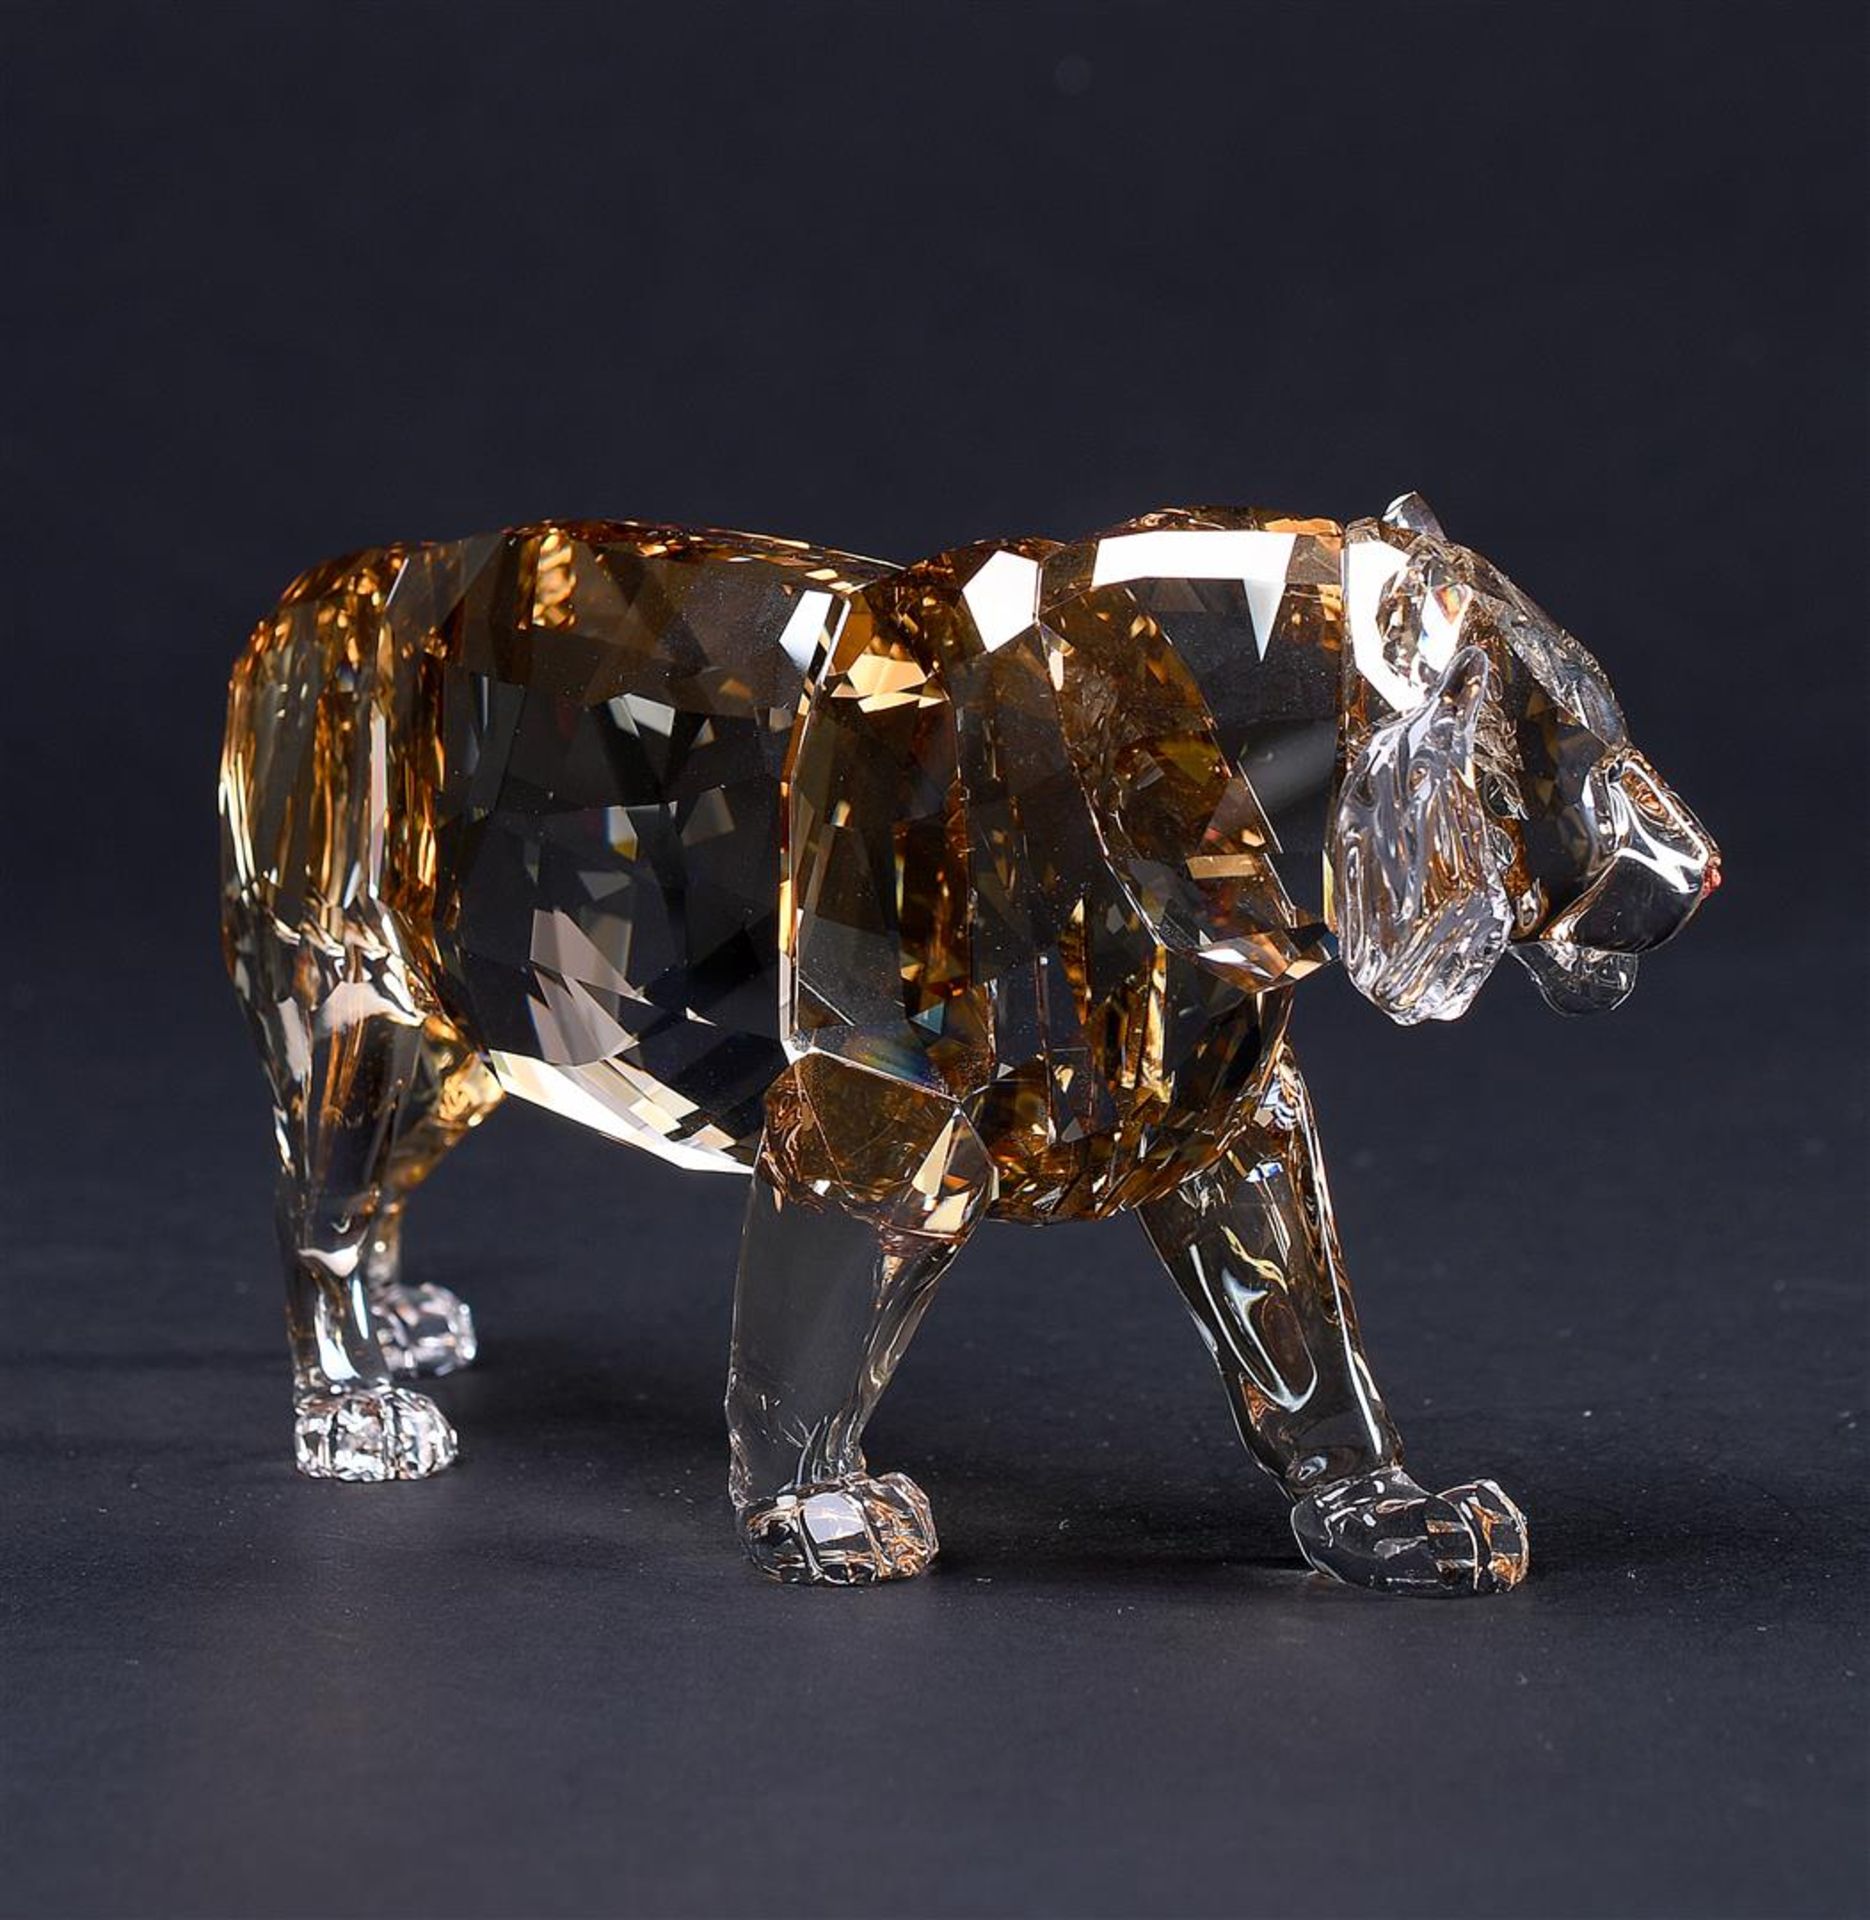 Swarovski SCS, Annual Edition 2010 -tiger, Year of issue 2010 ,1003148. Includes original box.
18,5  - Image 3 of 5